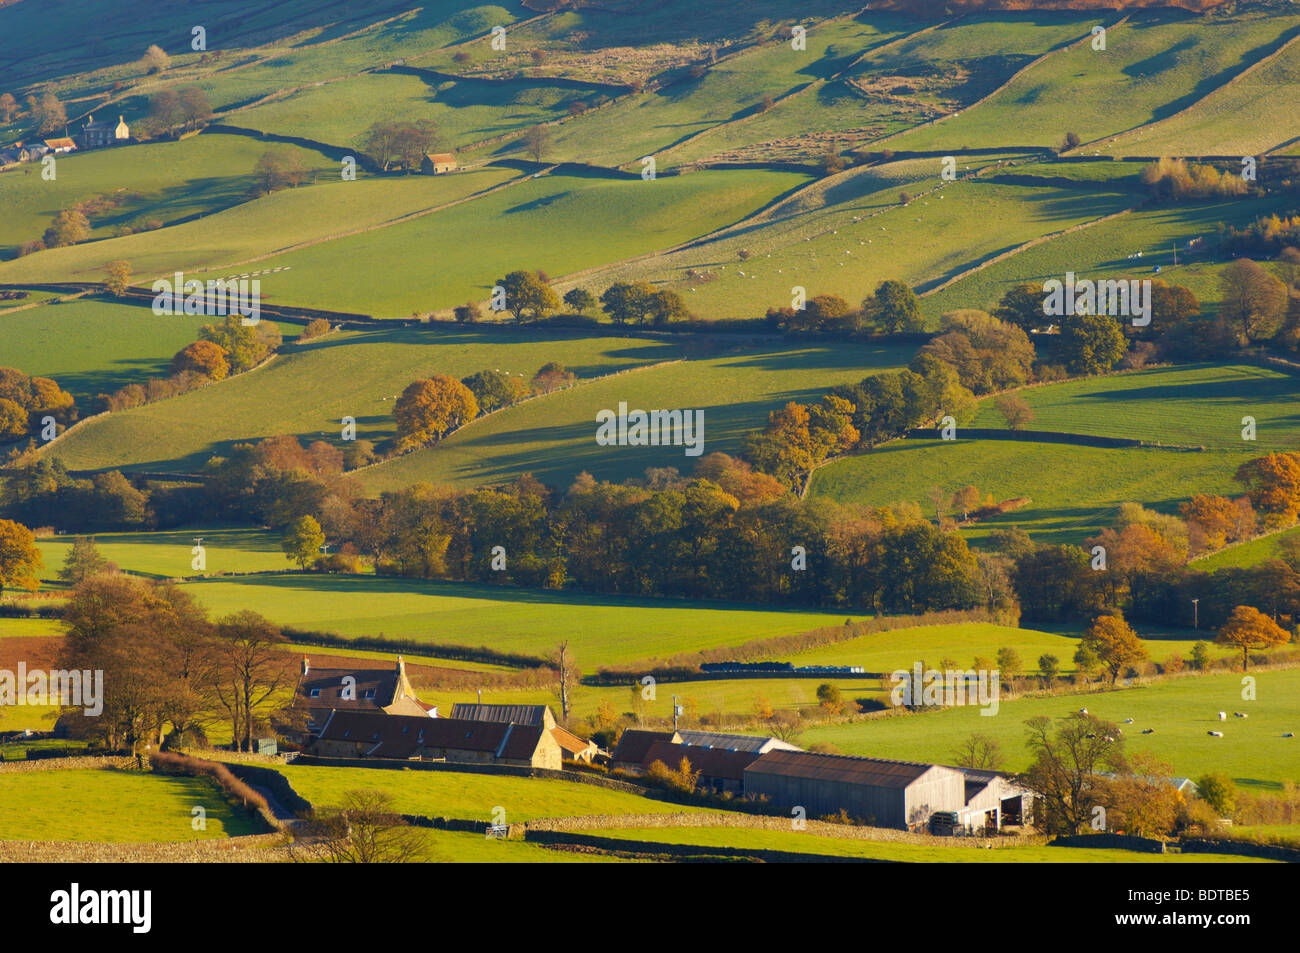 Danby Dale farm, North Yorkshire Moors National Park, England. Stock Photo